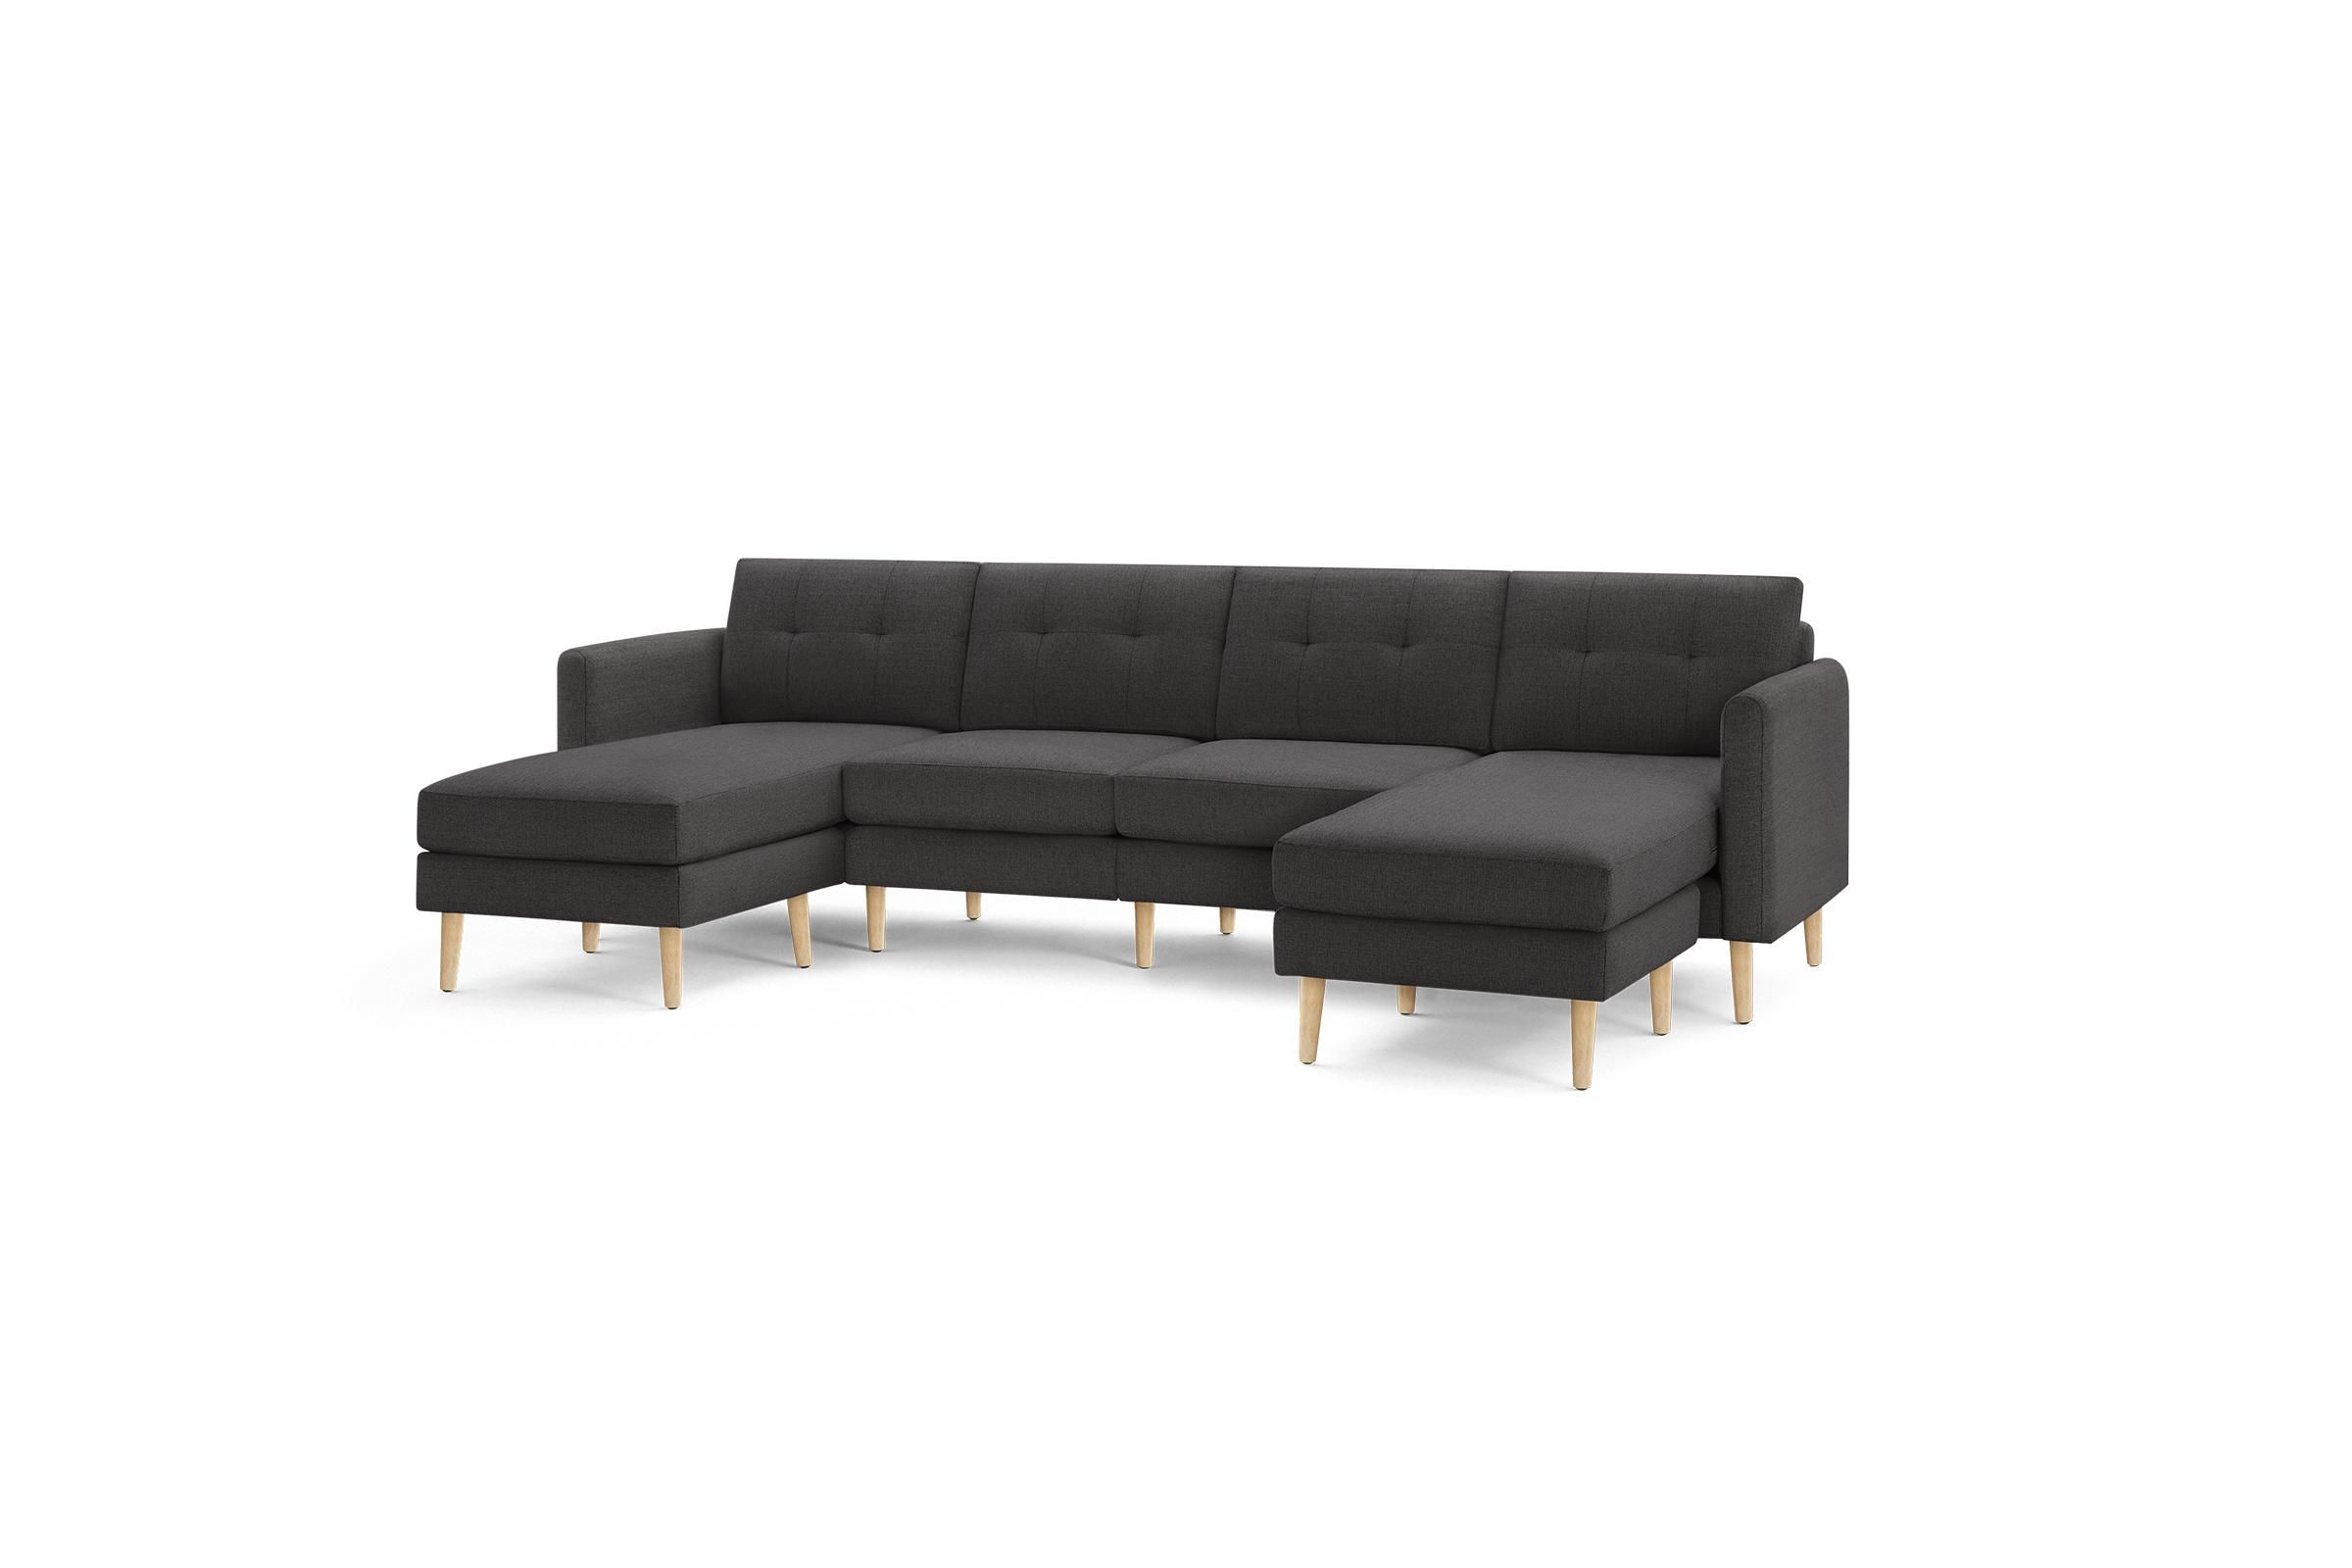 The Arch Nomad Double Chaise Sectional in Charcoal, Oak Legs